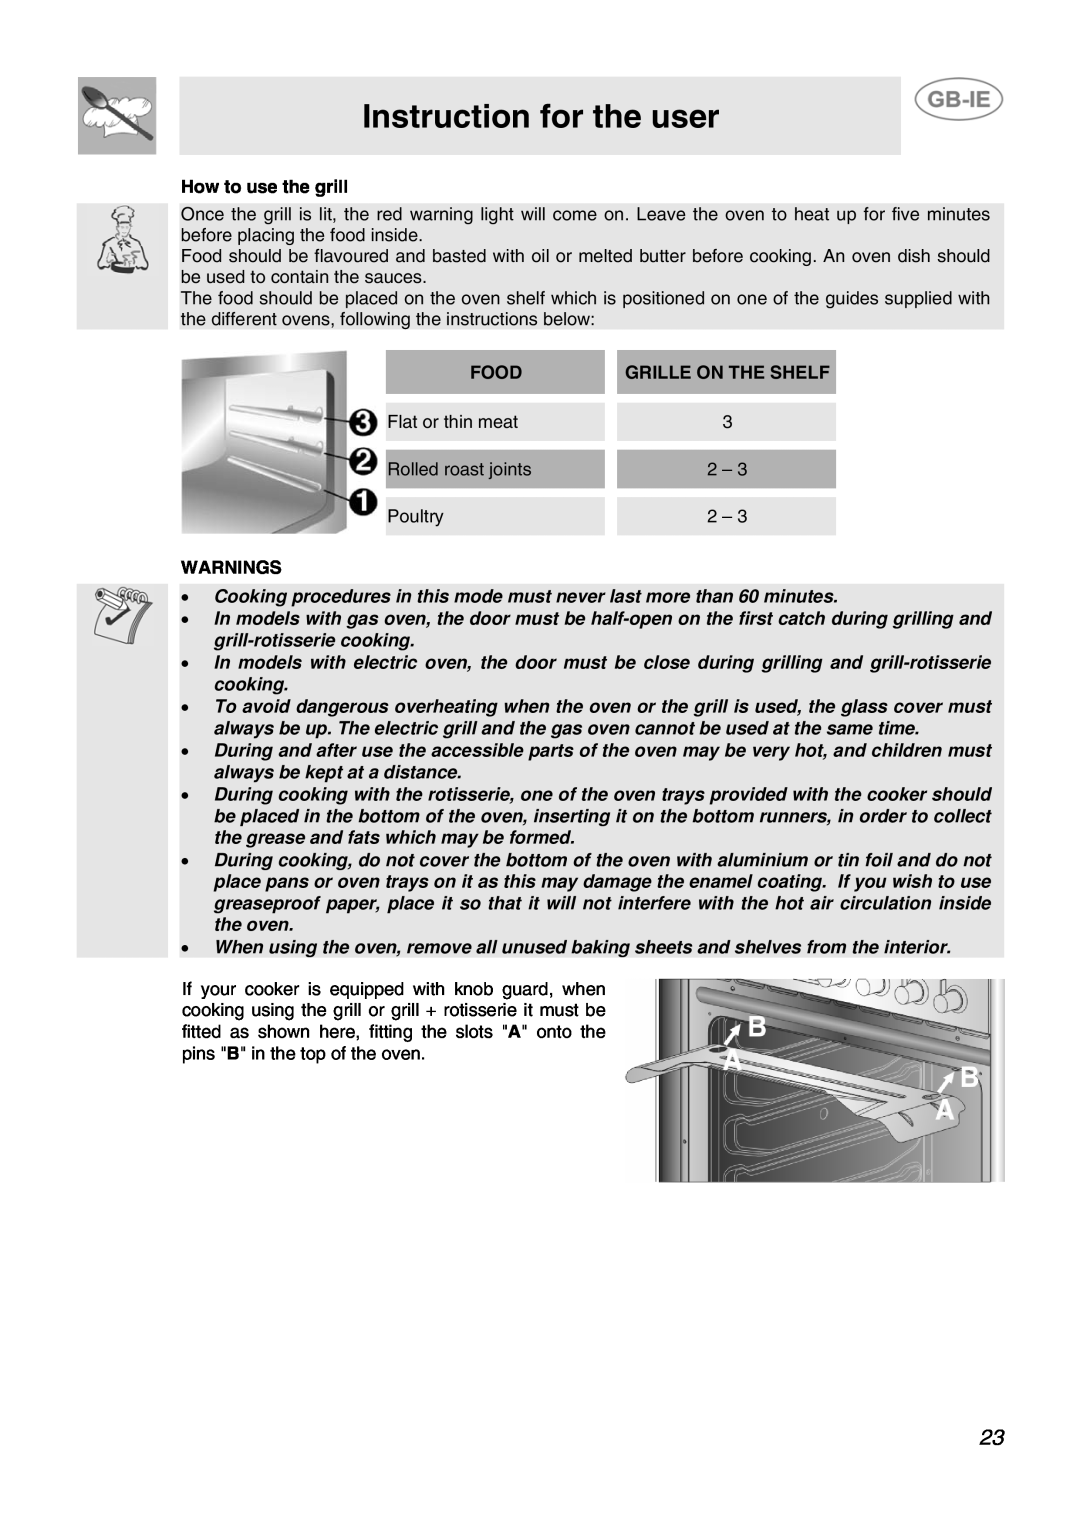 Smeg SCB60GB, SCB60MFX, SCB60GX manual Instruction for the user, How to use the grill, Food, Grille On The Shelf, Warnings 